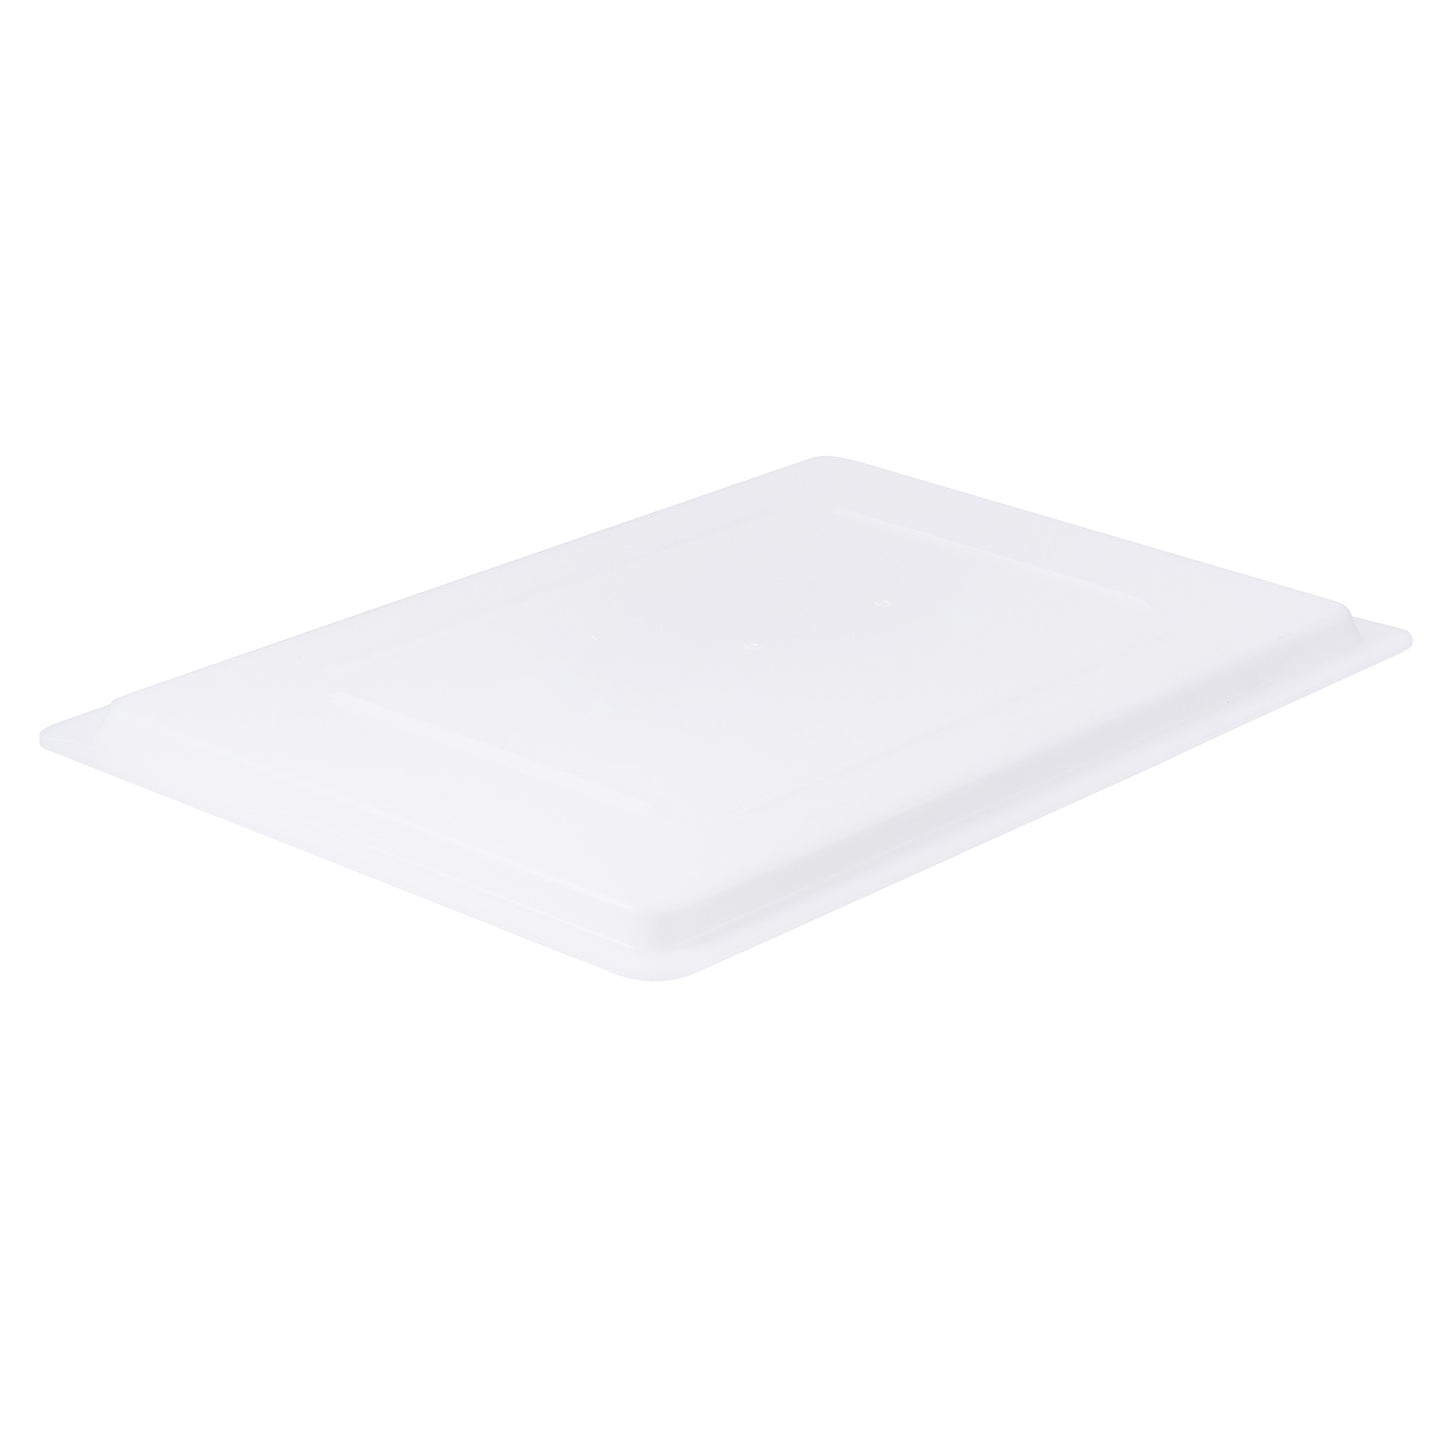 PFHW-C - Cover for Half-Size PFHW-Series, White Polypropylene